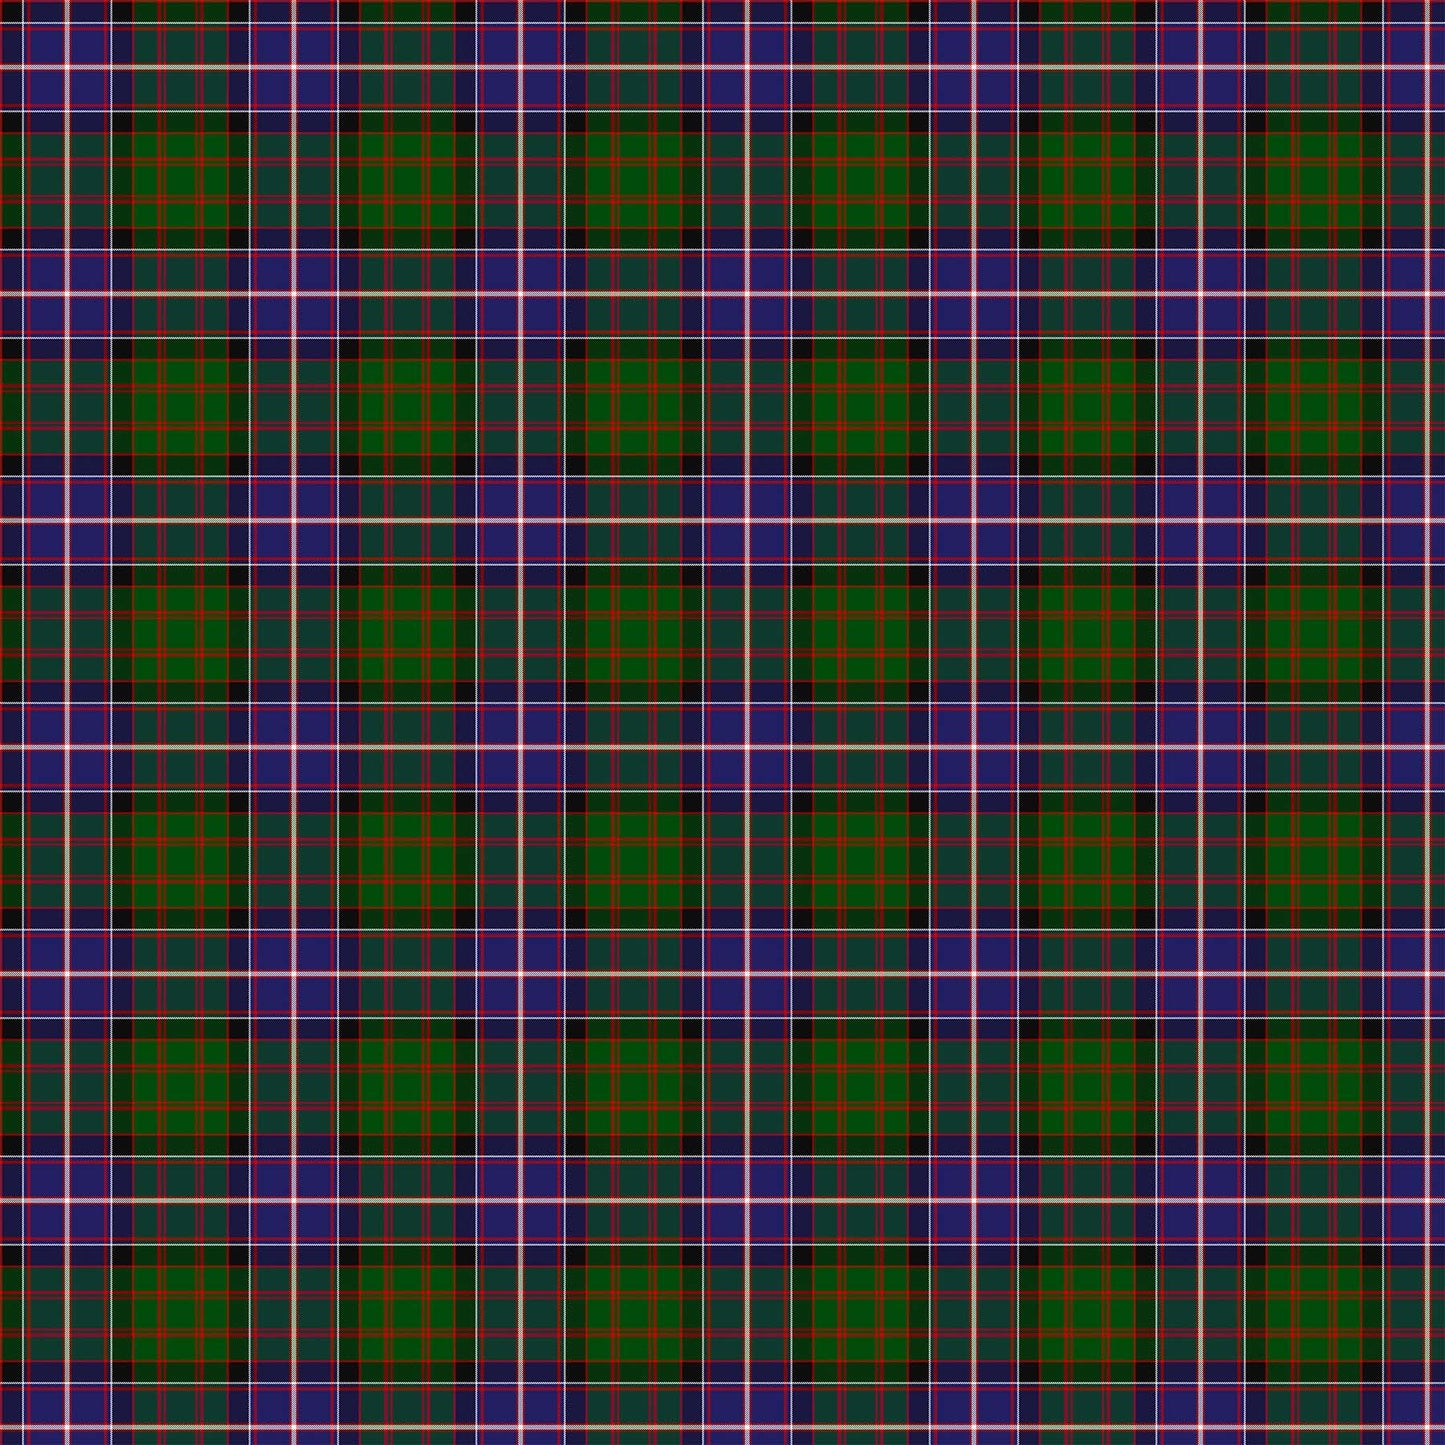 Tartan Traditions Ontario Green Multi W25577-76 by Northcott Fabrics (Sold in 25cm increments)